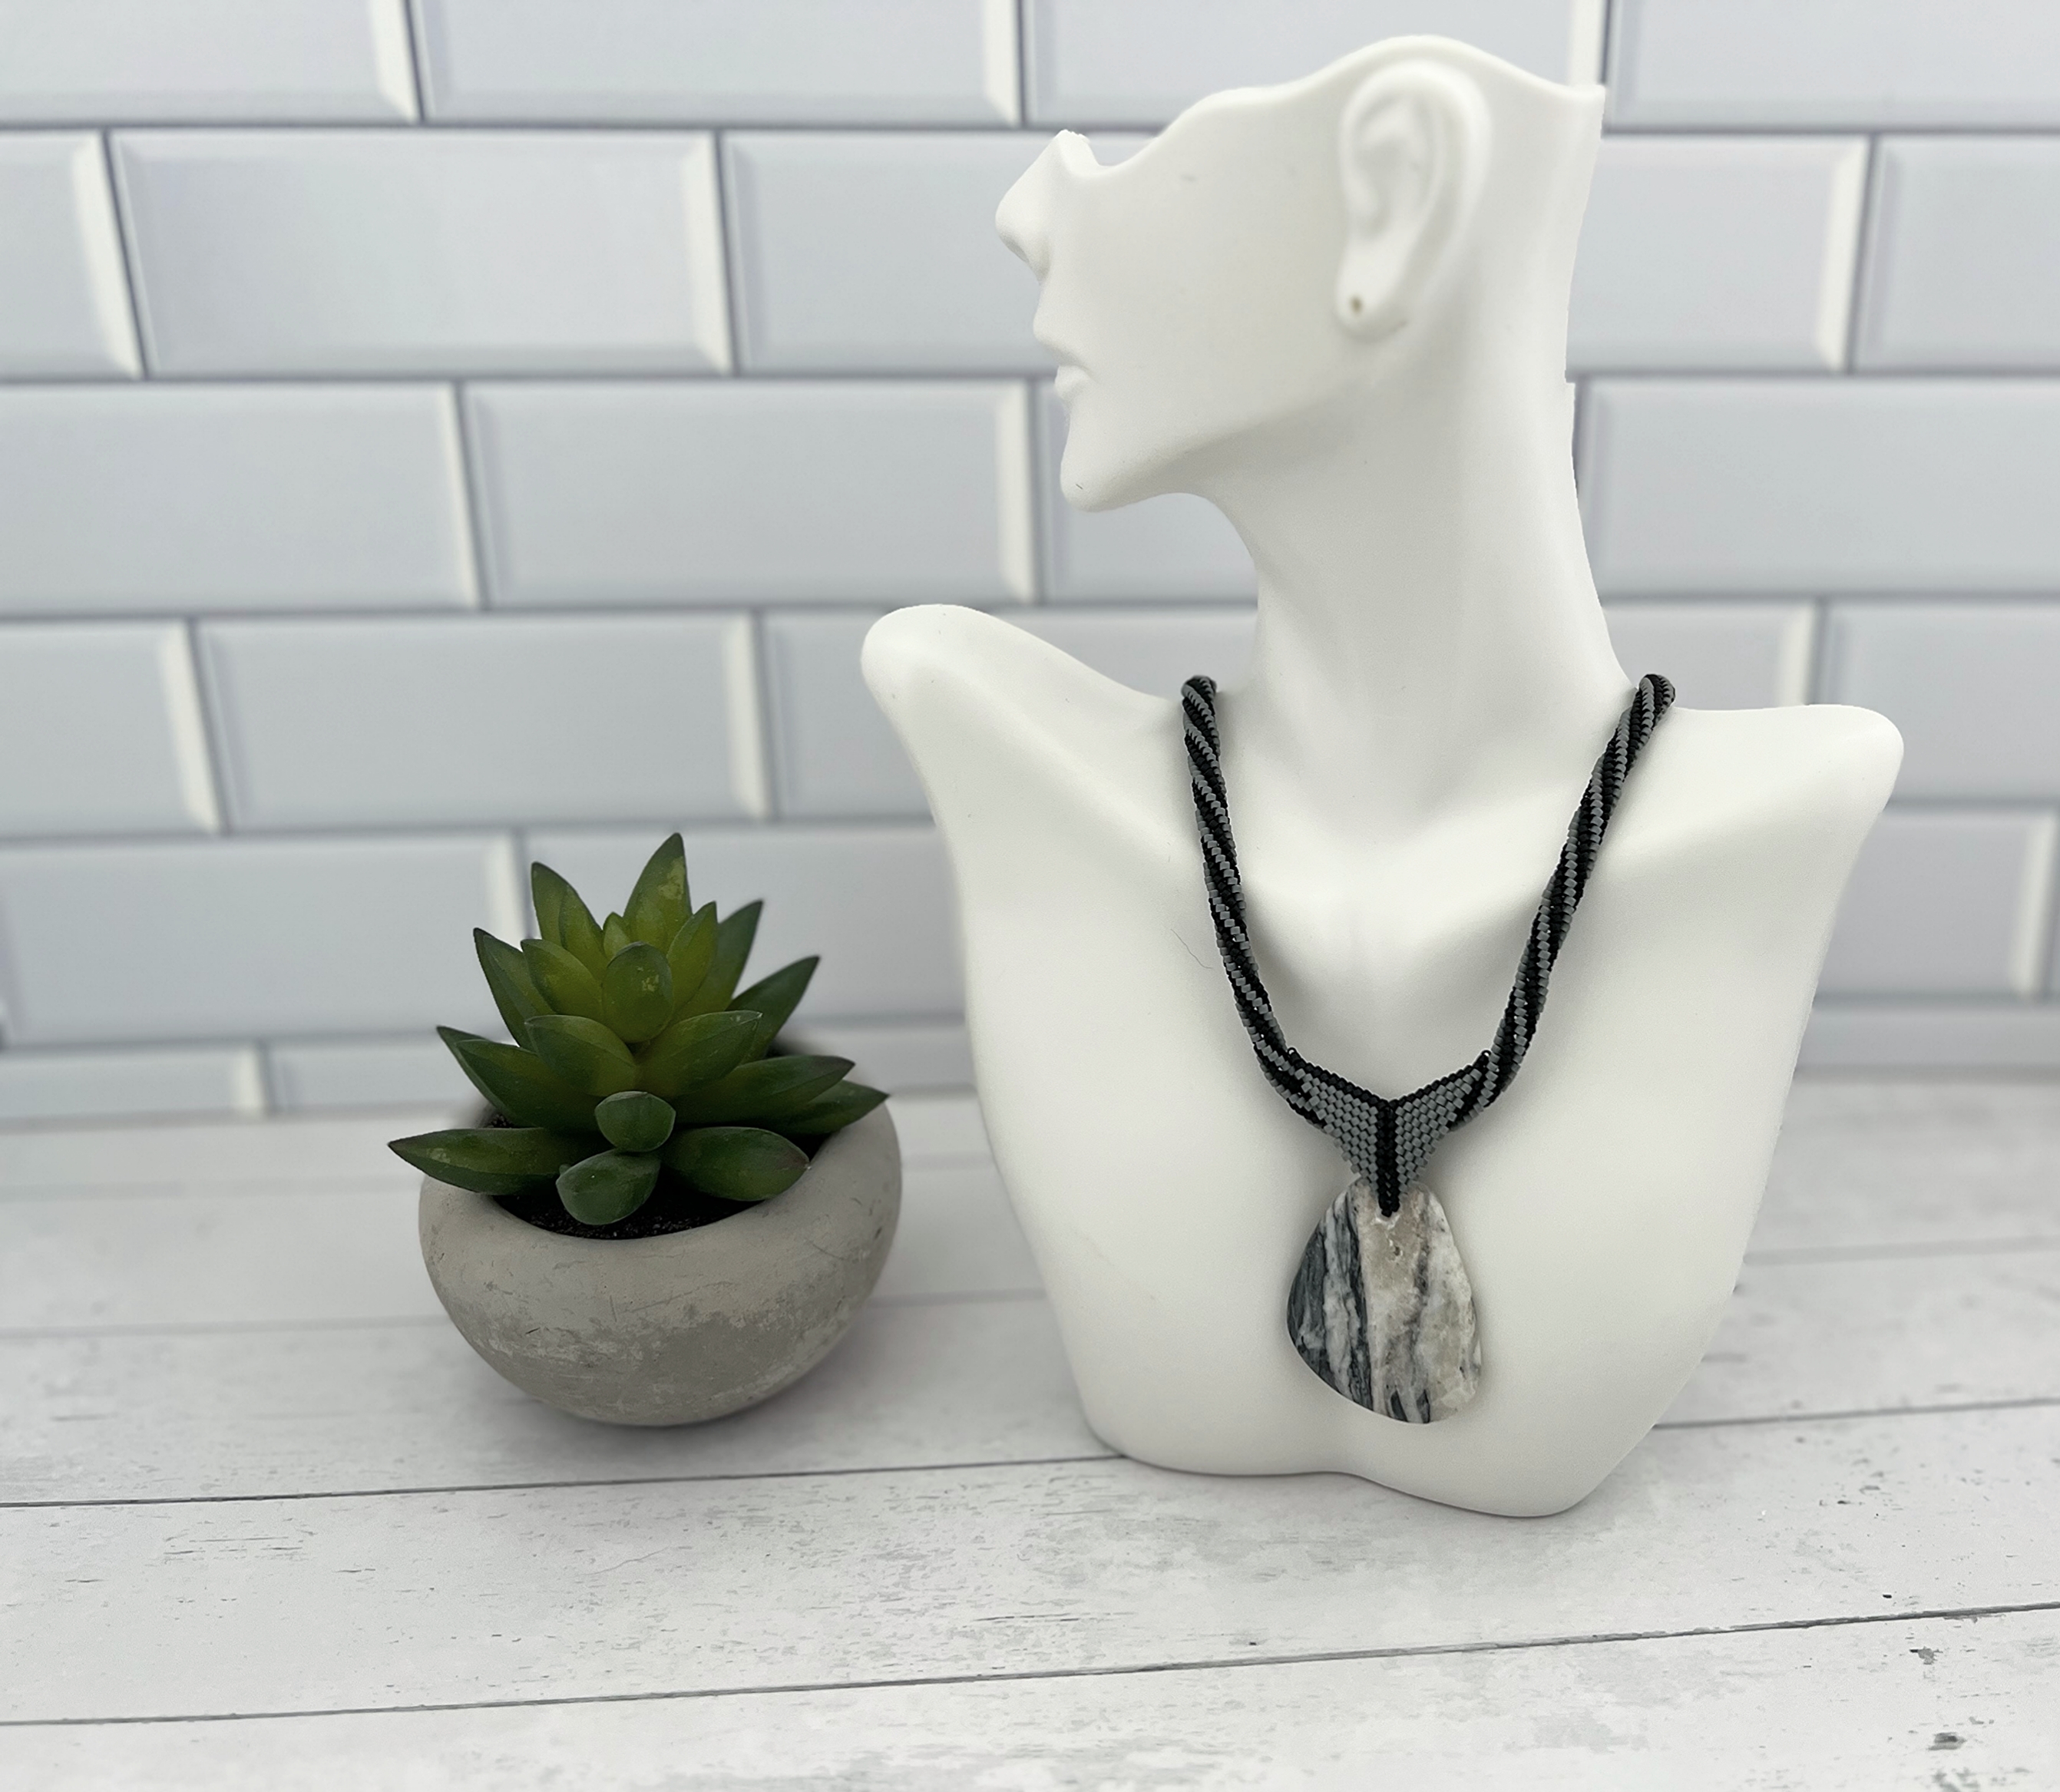 Black and grey beaded necklace shown on bust display.